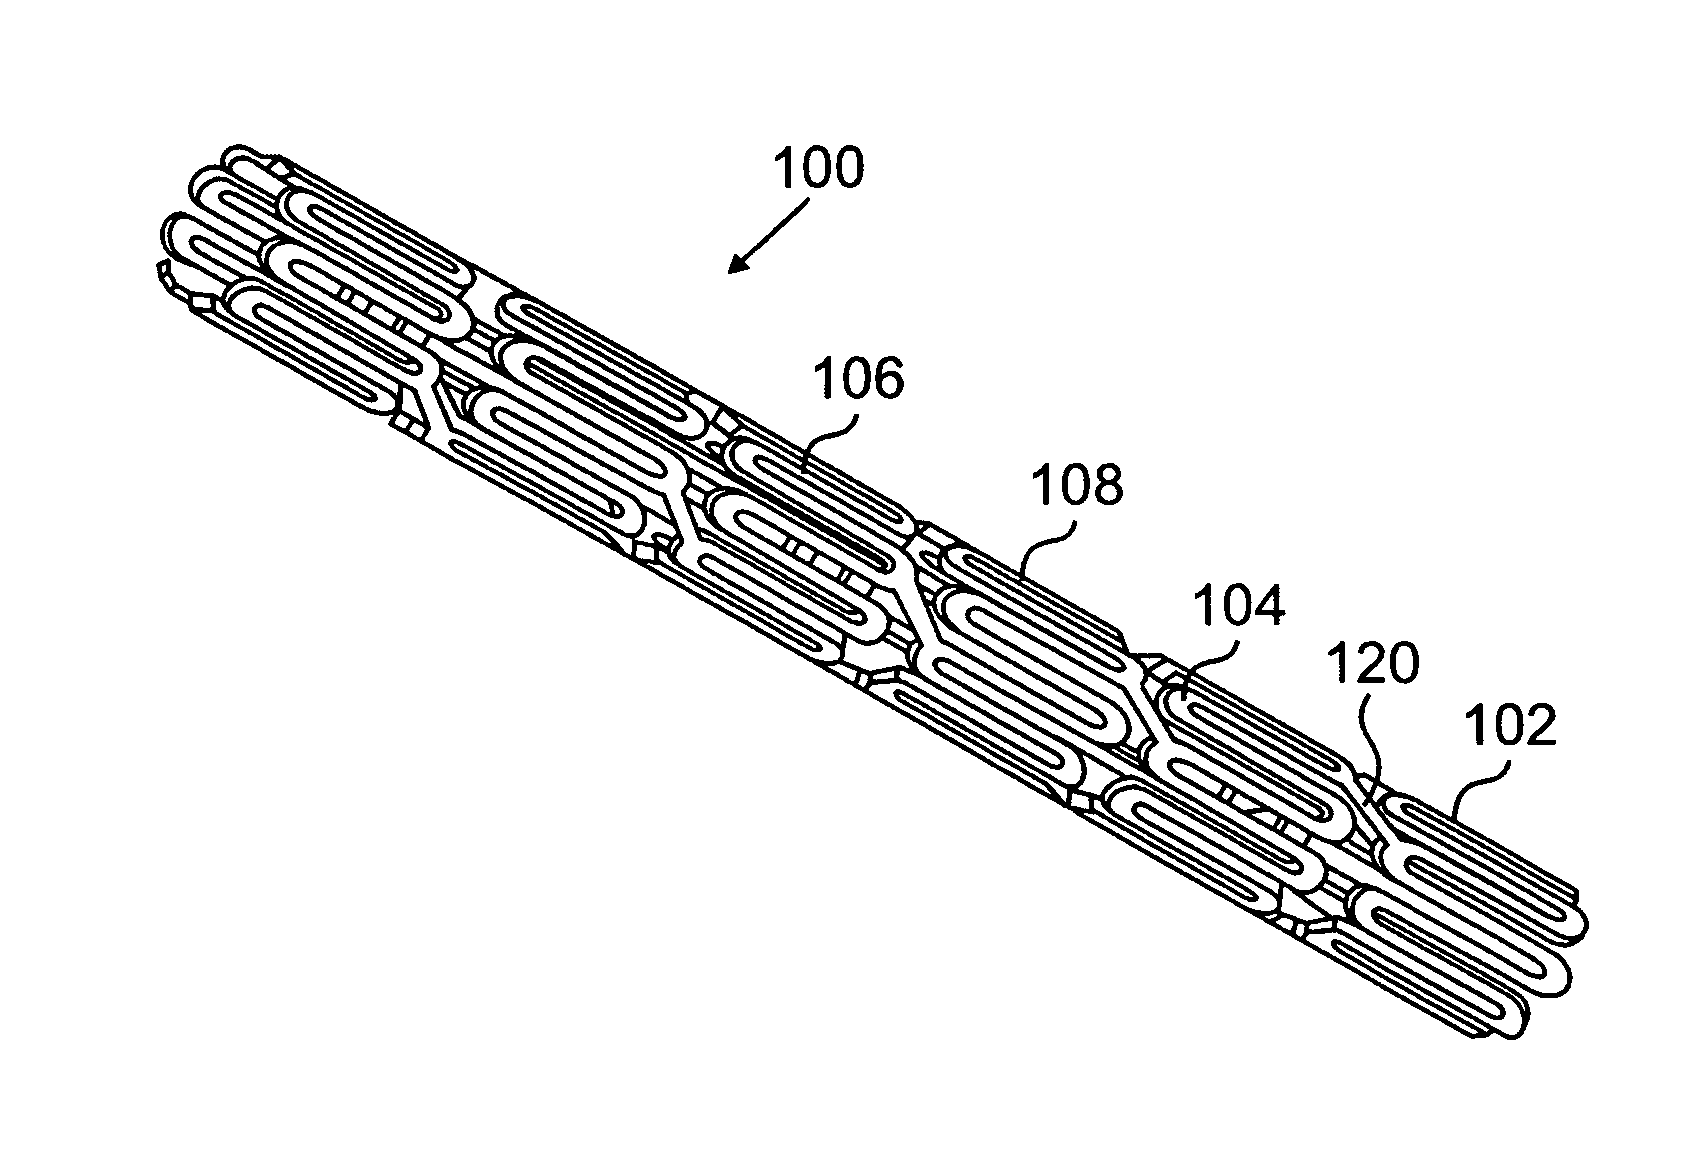 Methods and devices having electrically actuatable surfaces